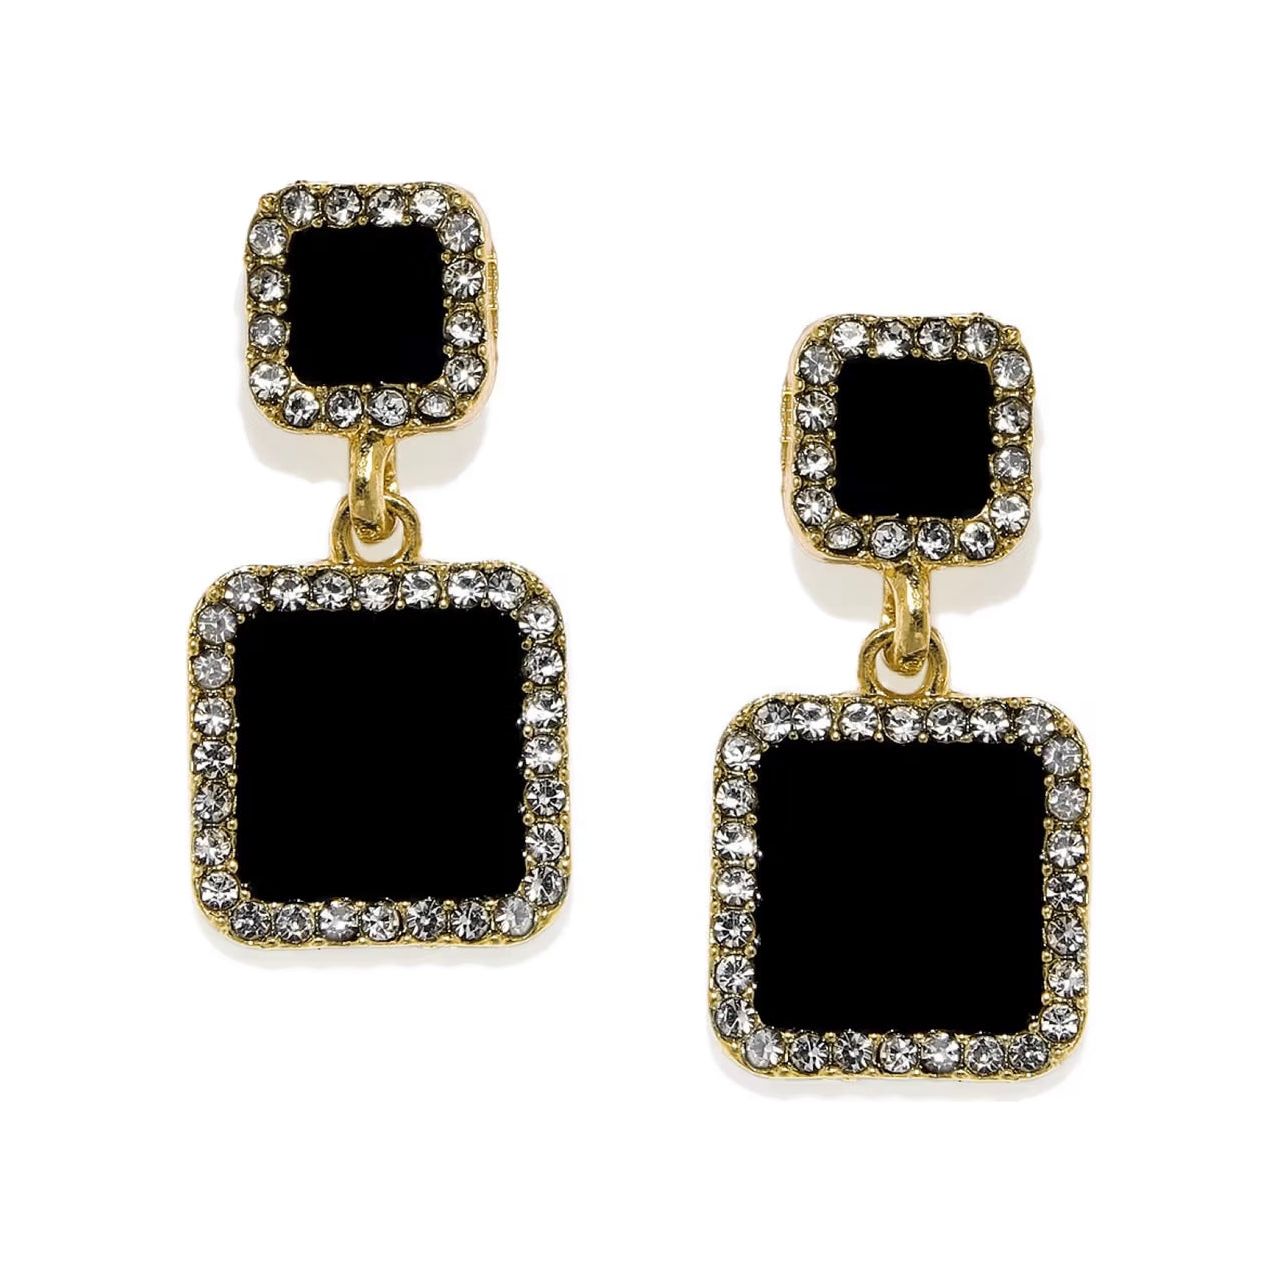 Princess Cut Black Double Square Halo Bling Statement Earrings